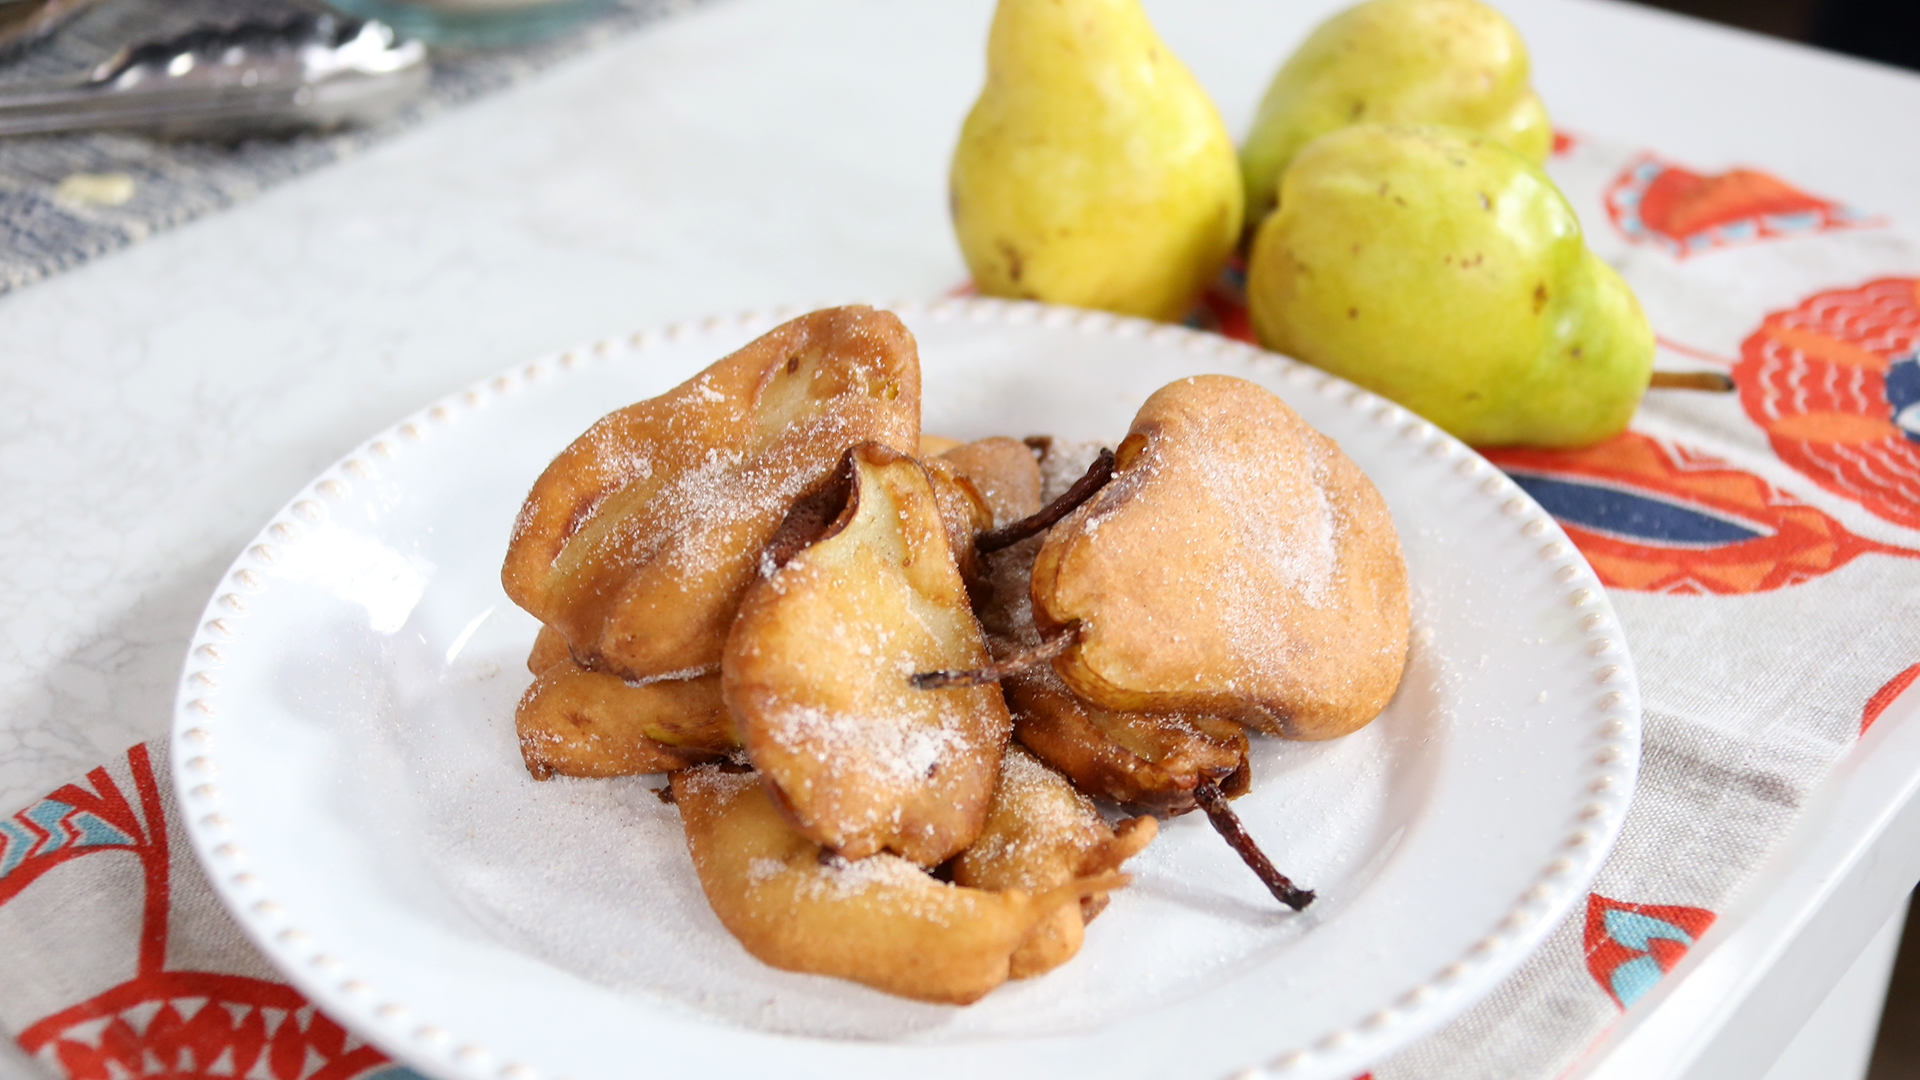 Pear fritters with cinnamon sugar